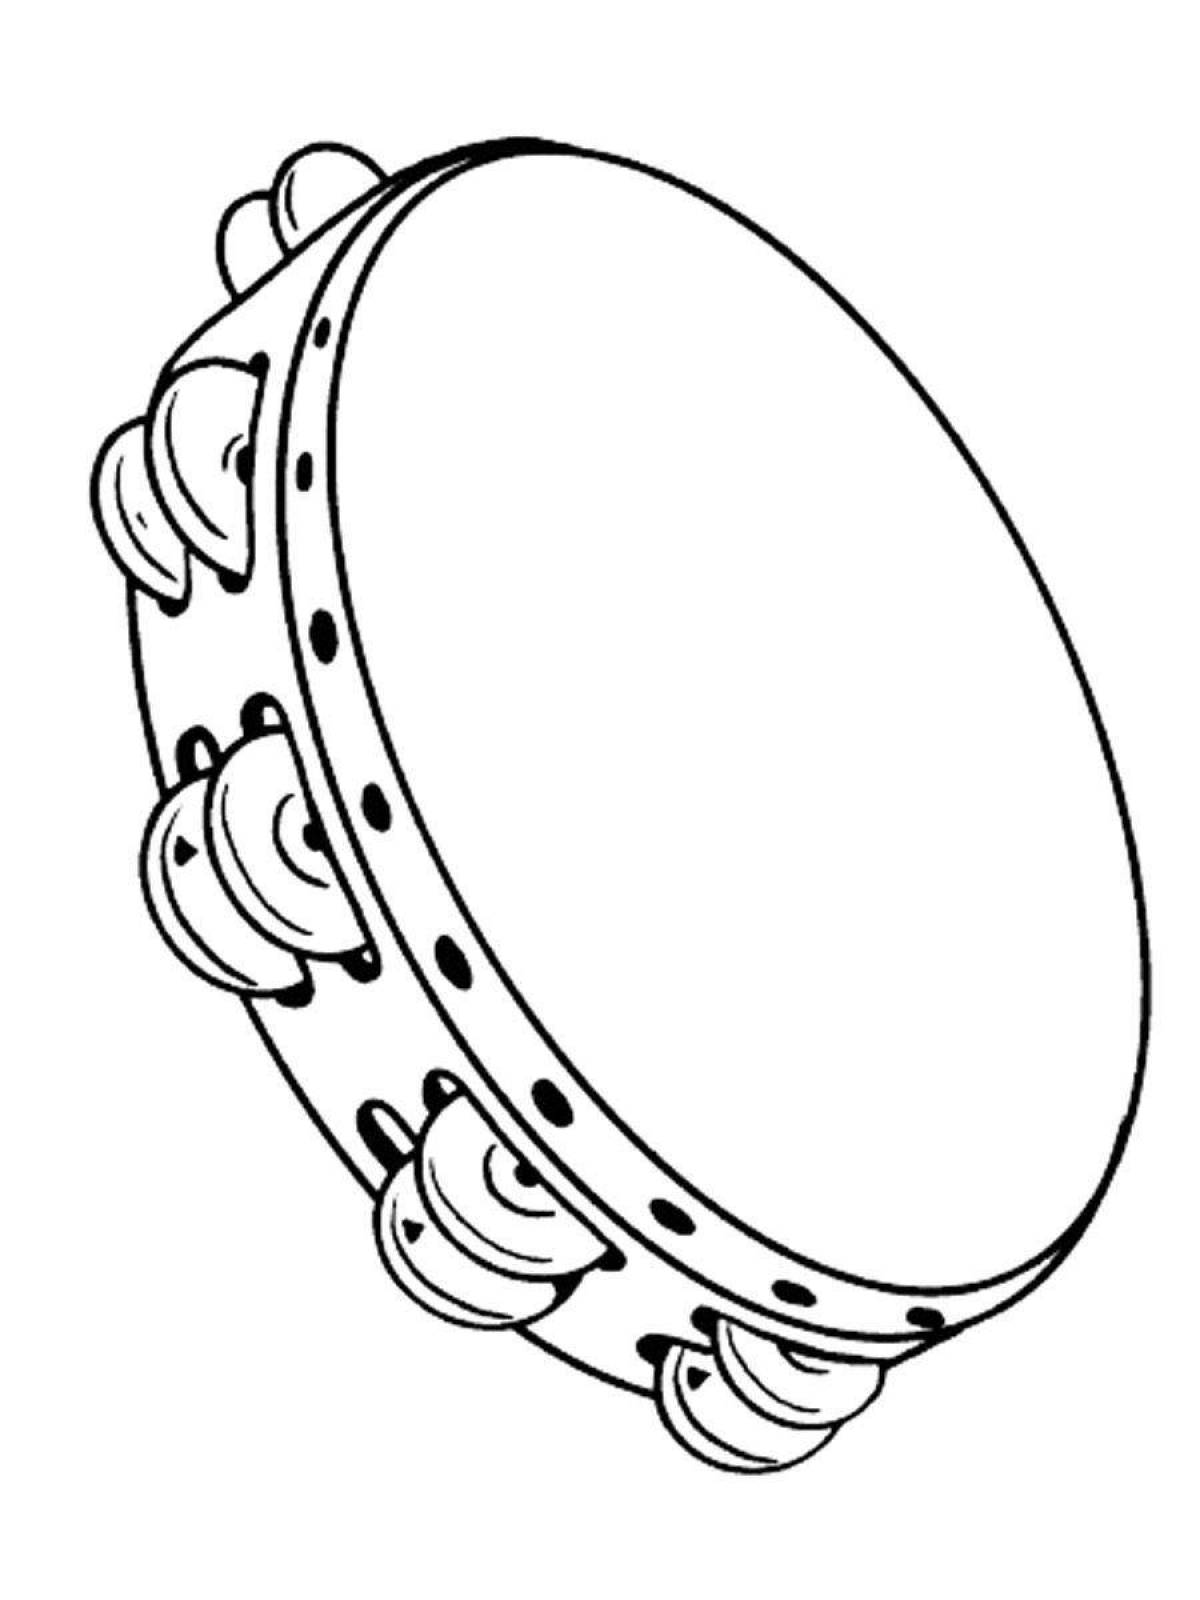 Holiday coloring tambourine for the little ones